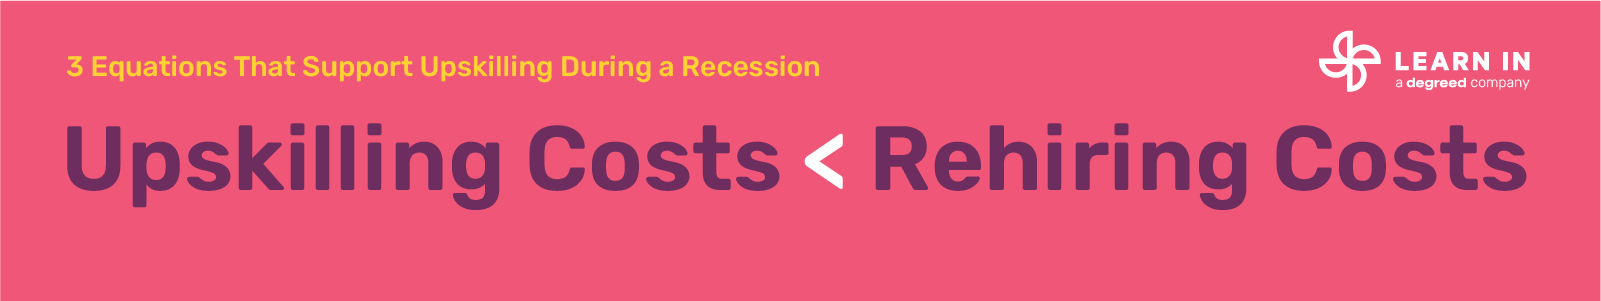 2. Upskilling costs < rehiring costs in a recession